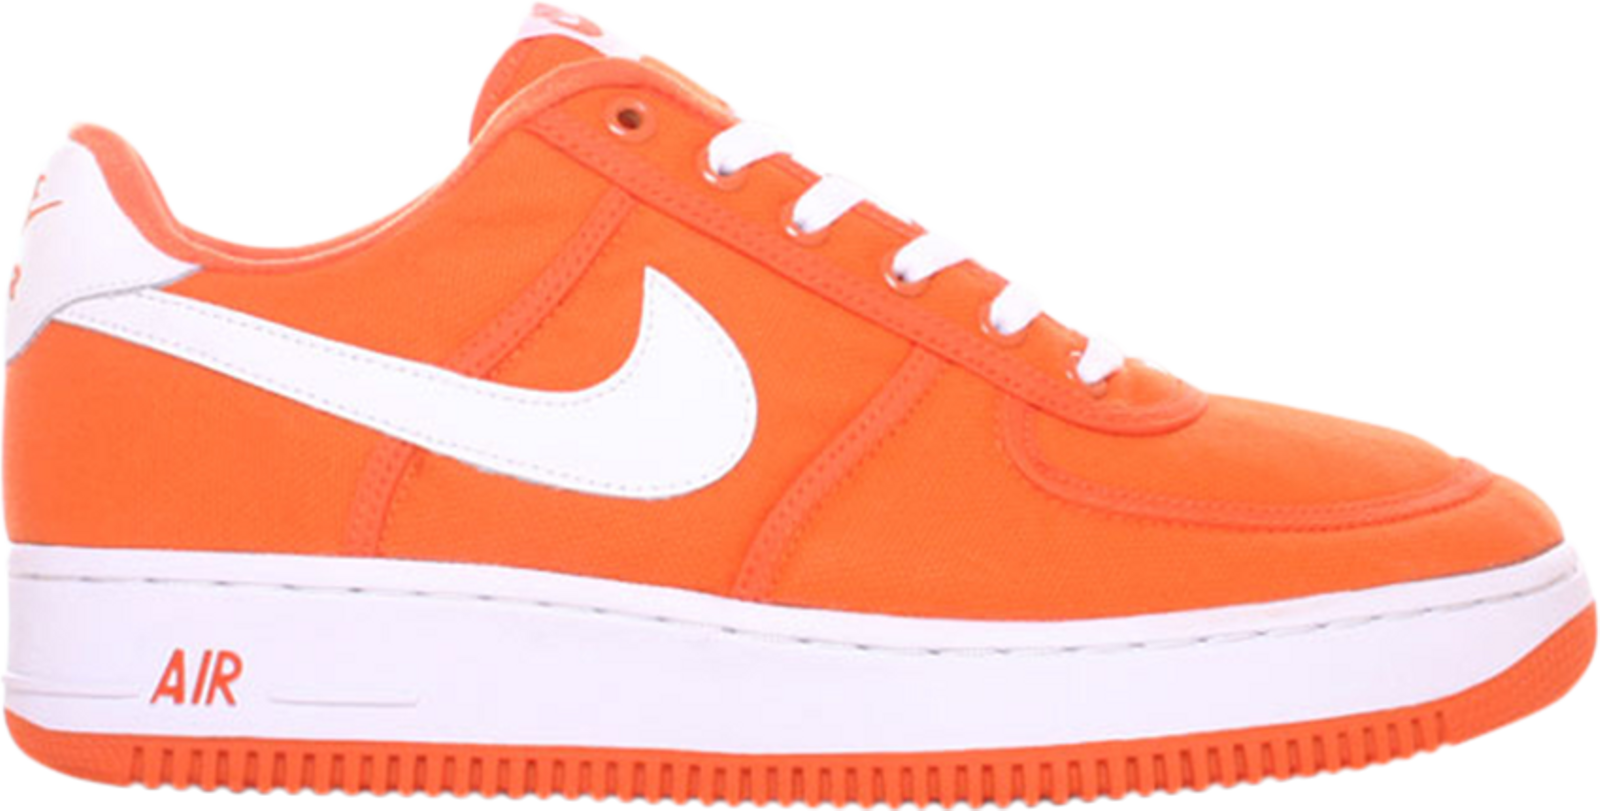 Nike Air Force 1 low (624020 811) 新品即決 | firepieovens.com